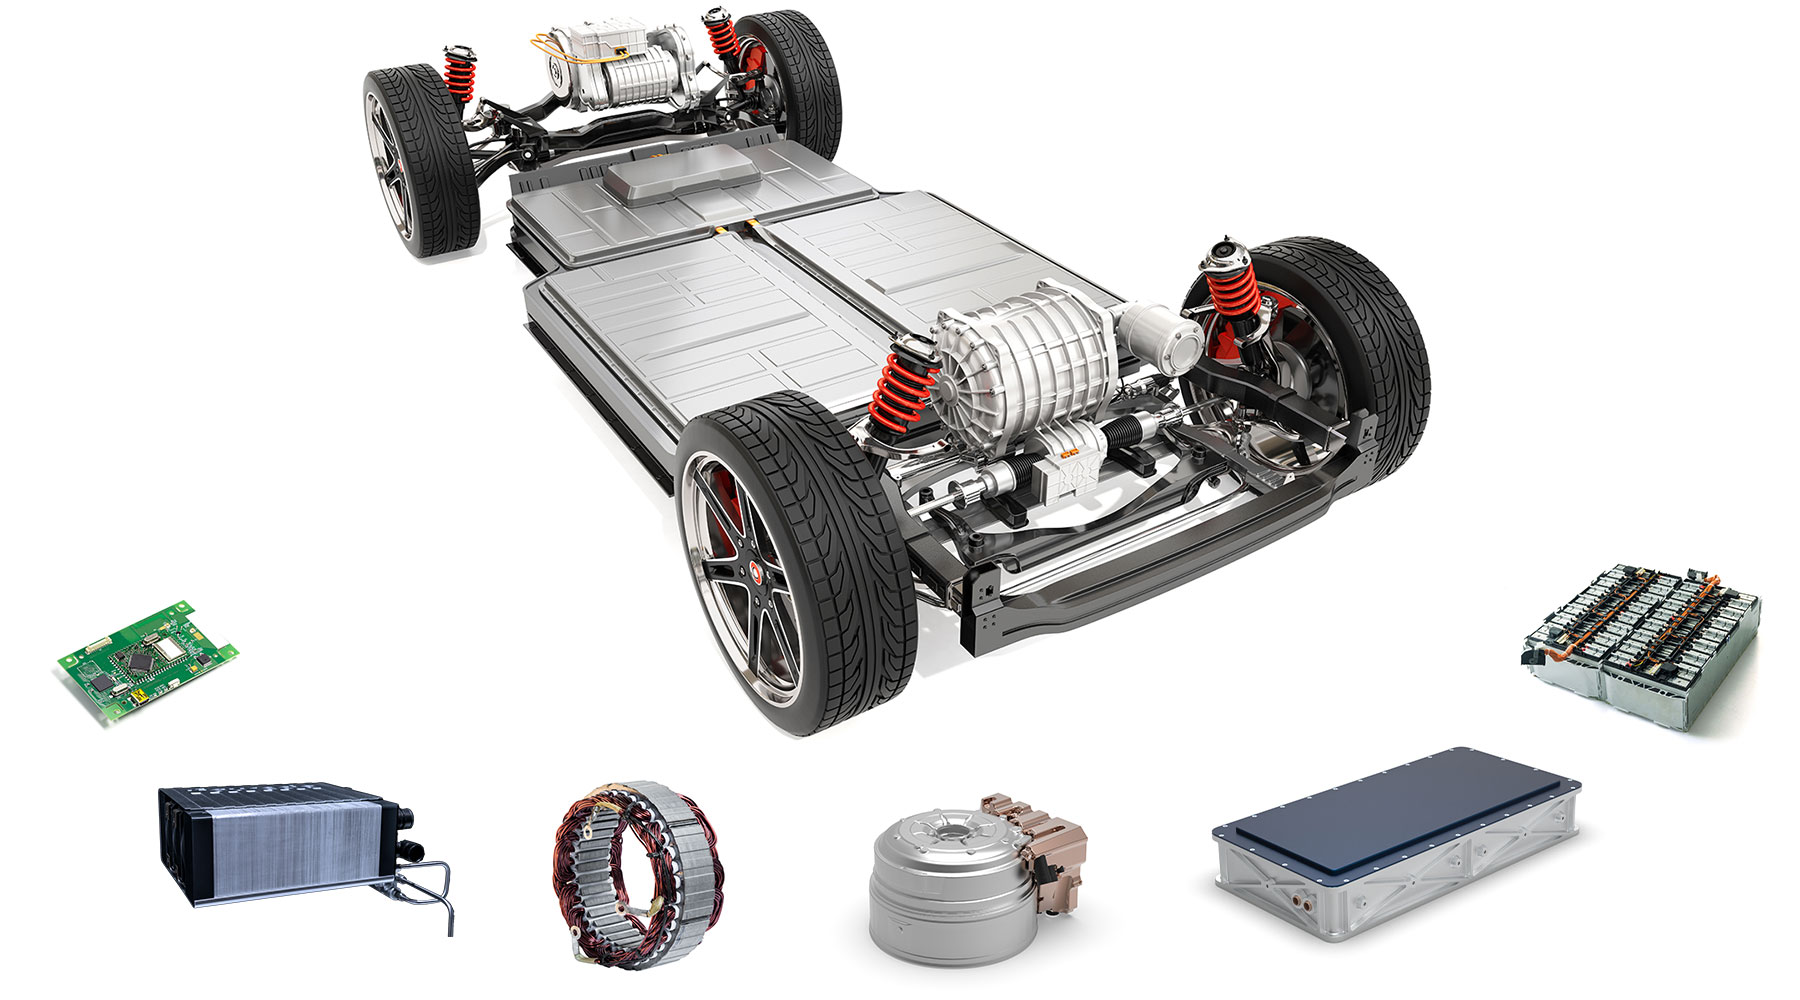 C-SYS - SEMA Technology Group. Battery cell, battery frame, rotor/stator, chassis, hybrid transmission case